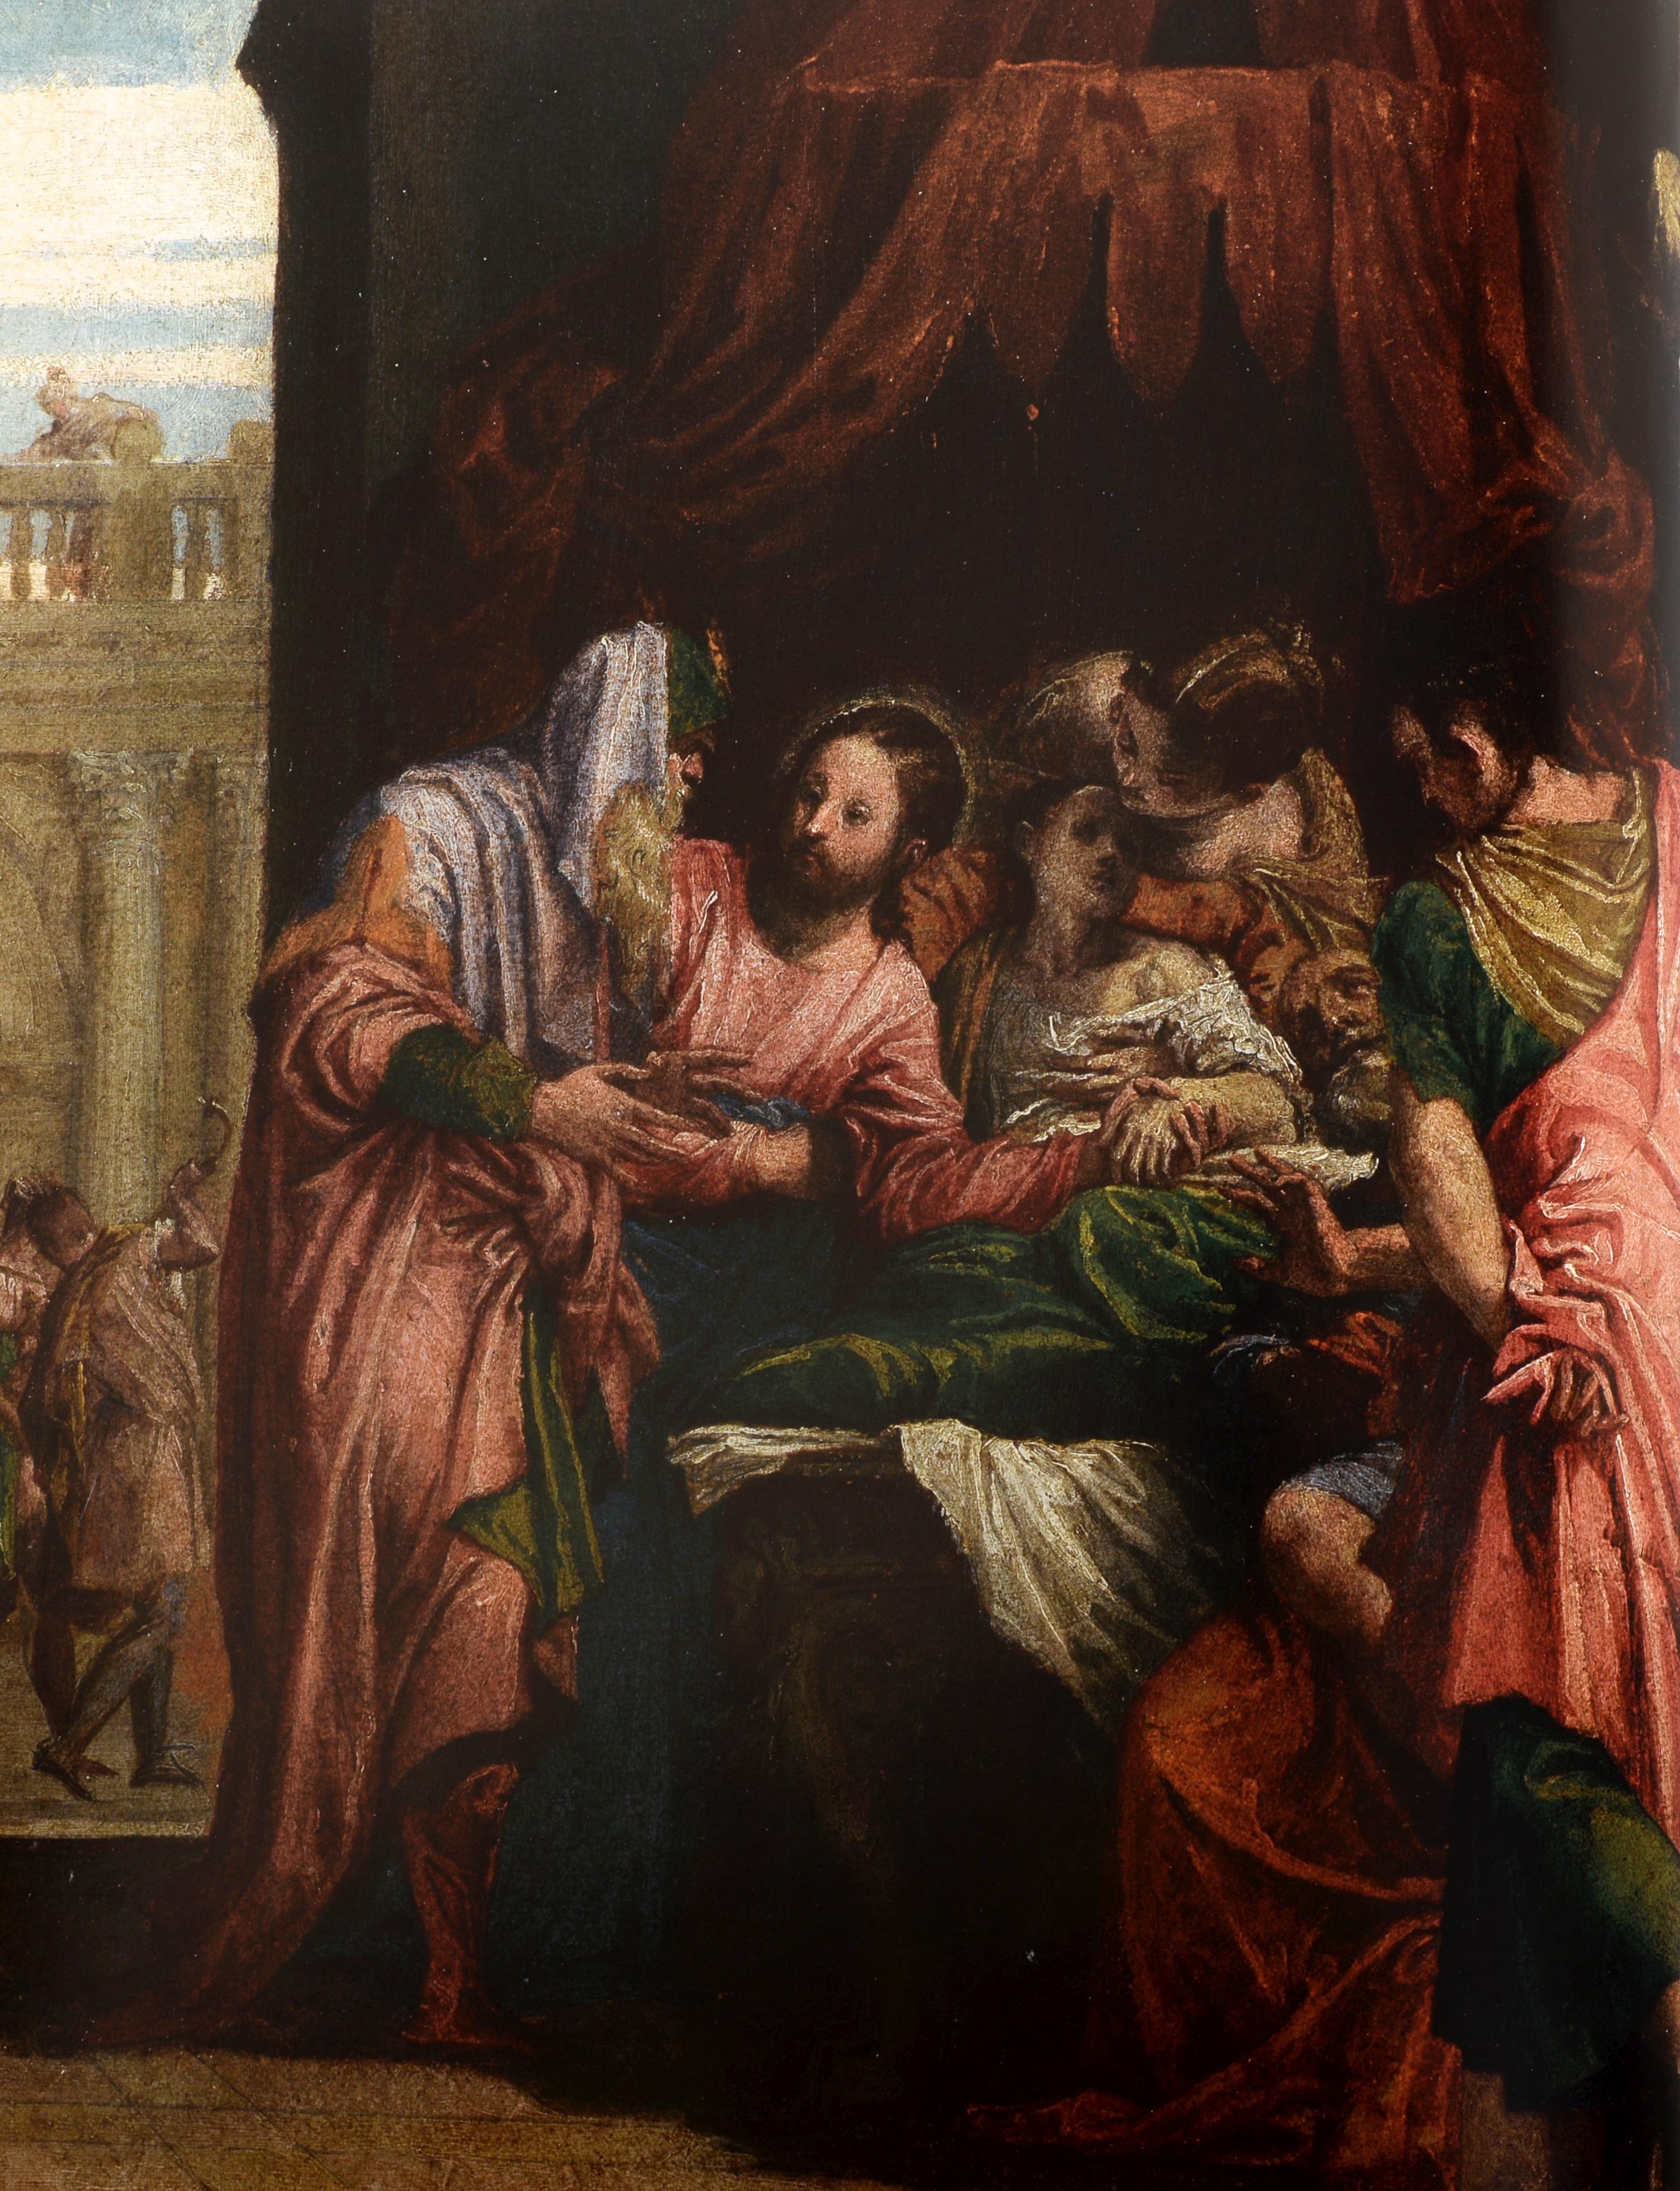 American Paolo Veronese: A Master and His Workshop in Renaissance Venice For Sale